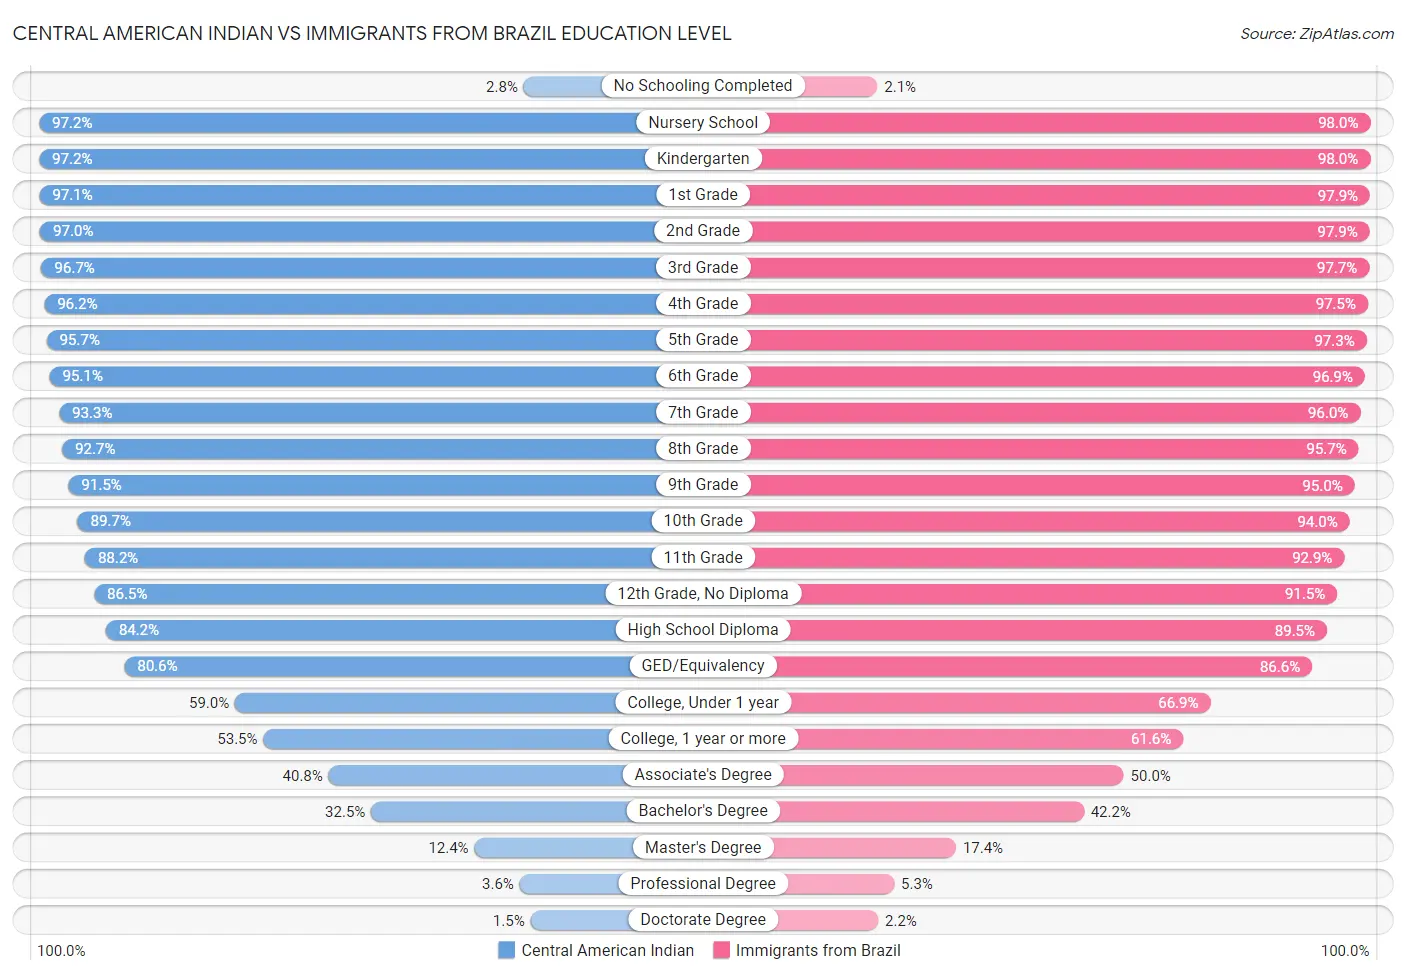 Central American Indian vs Immigrants from Brazil Education Level